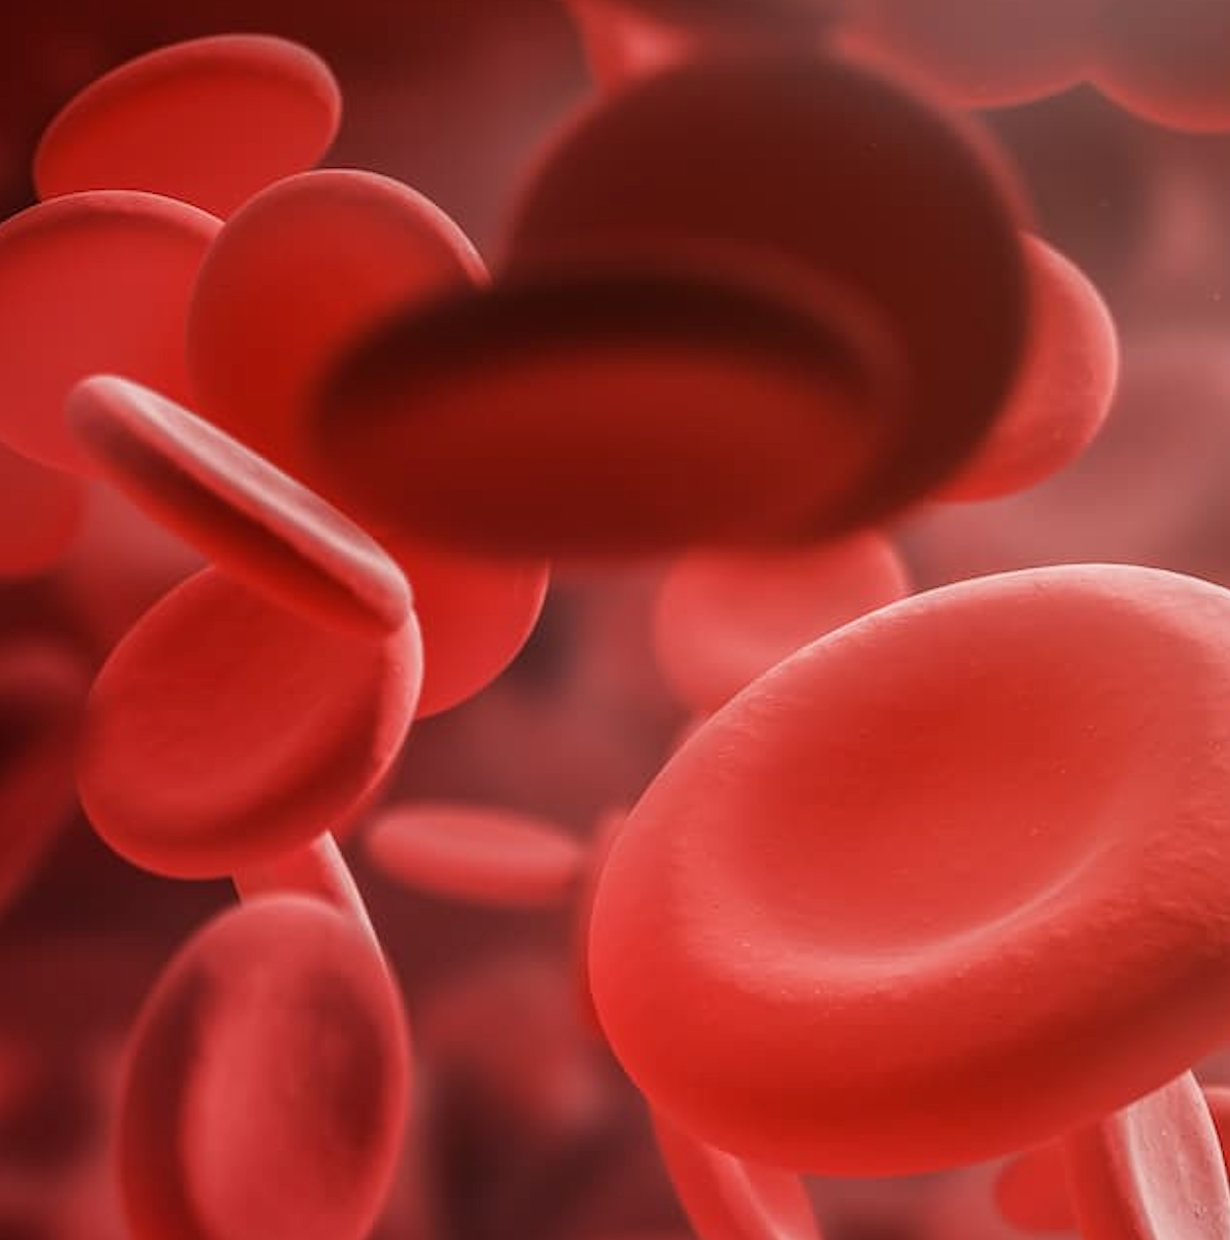 Eltrombopag Demonstrates Safety, Efficacy in Patients with Severe Aplastic Anemia 